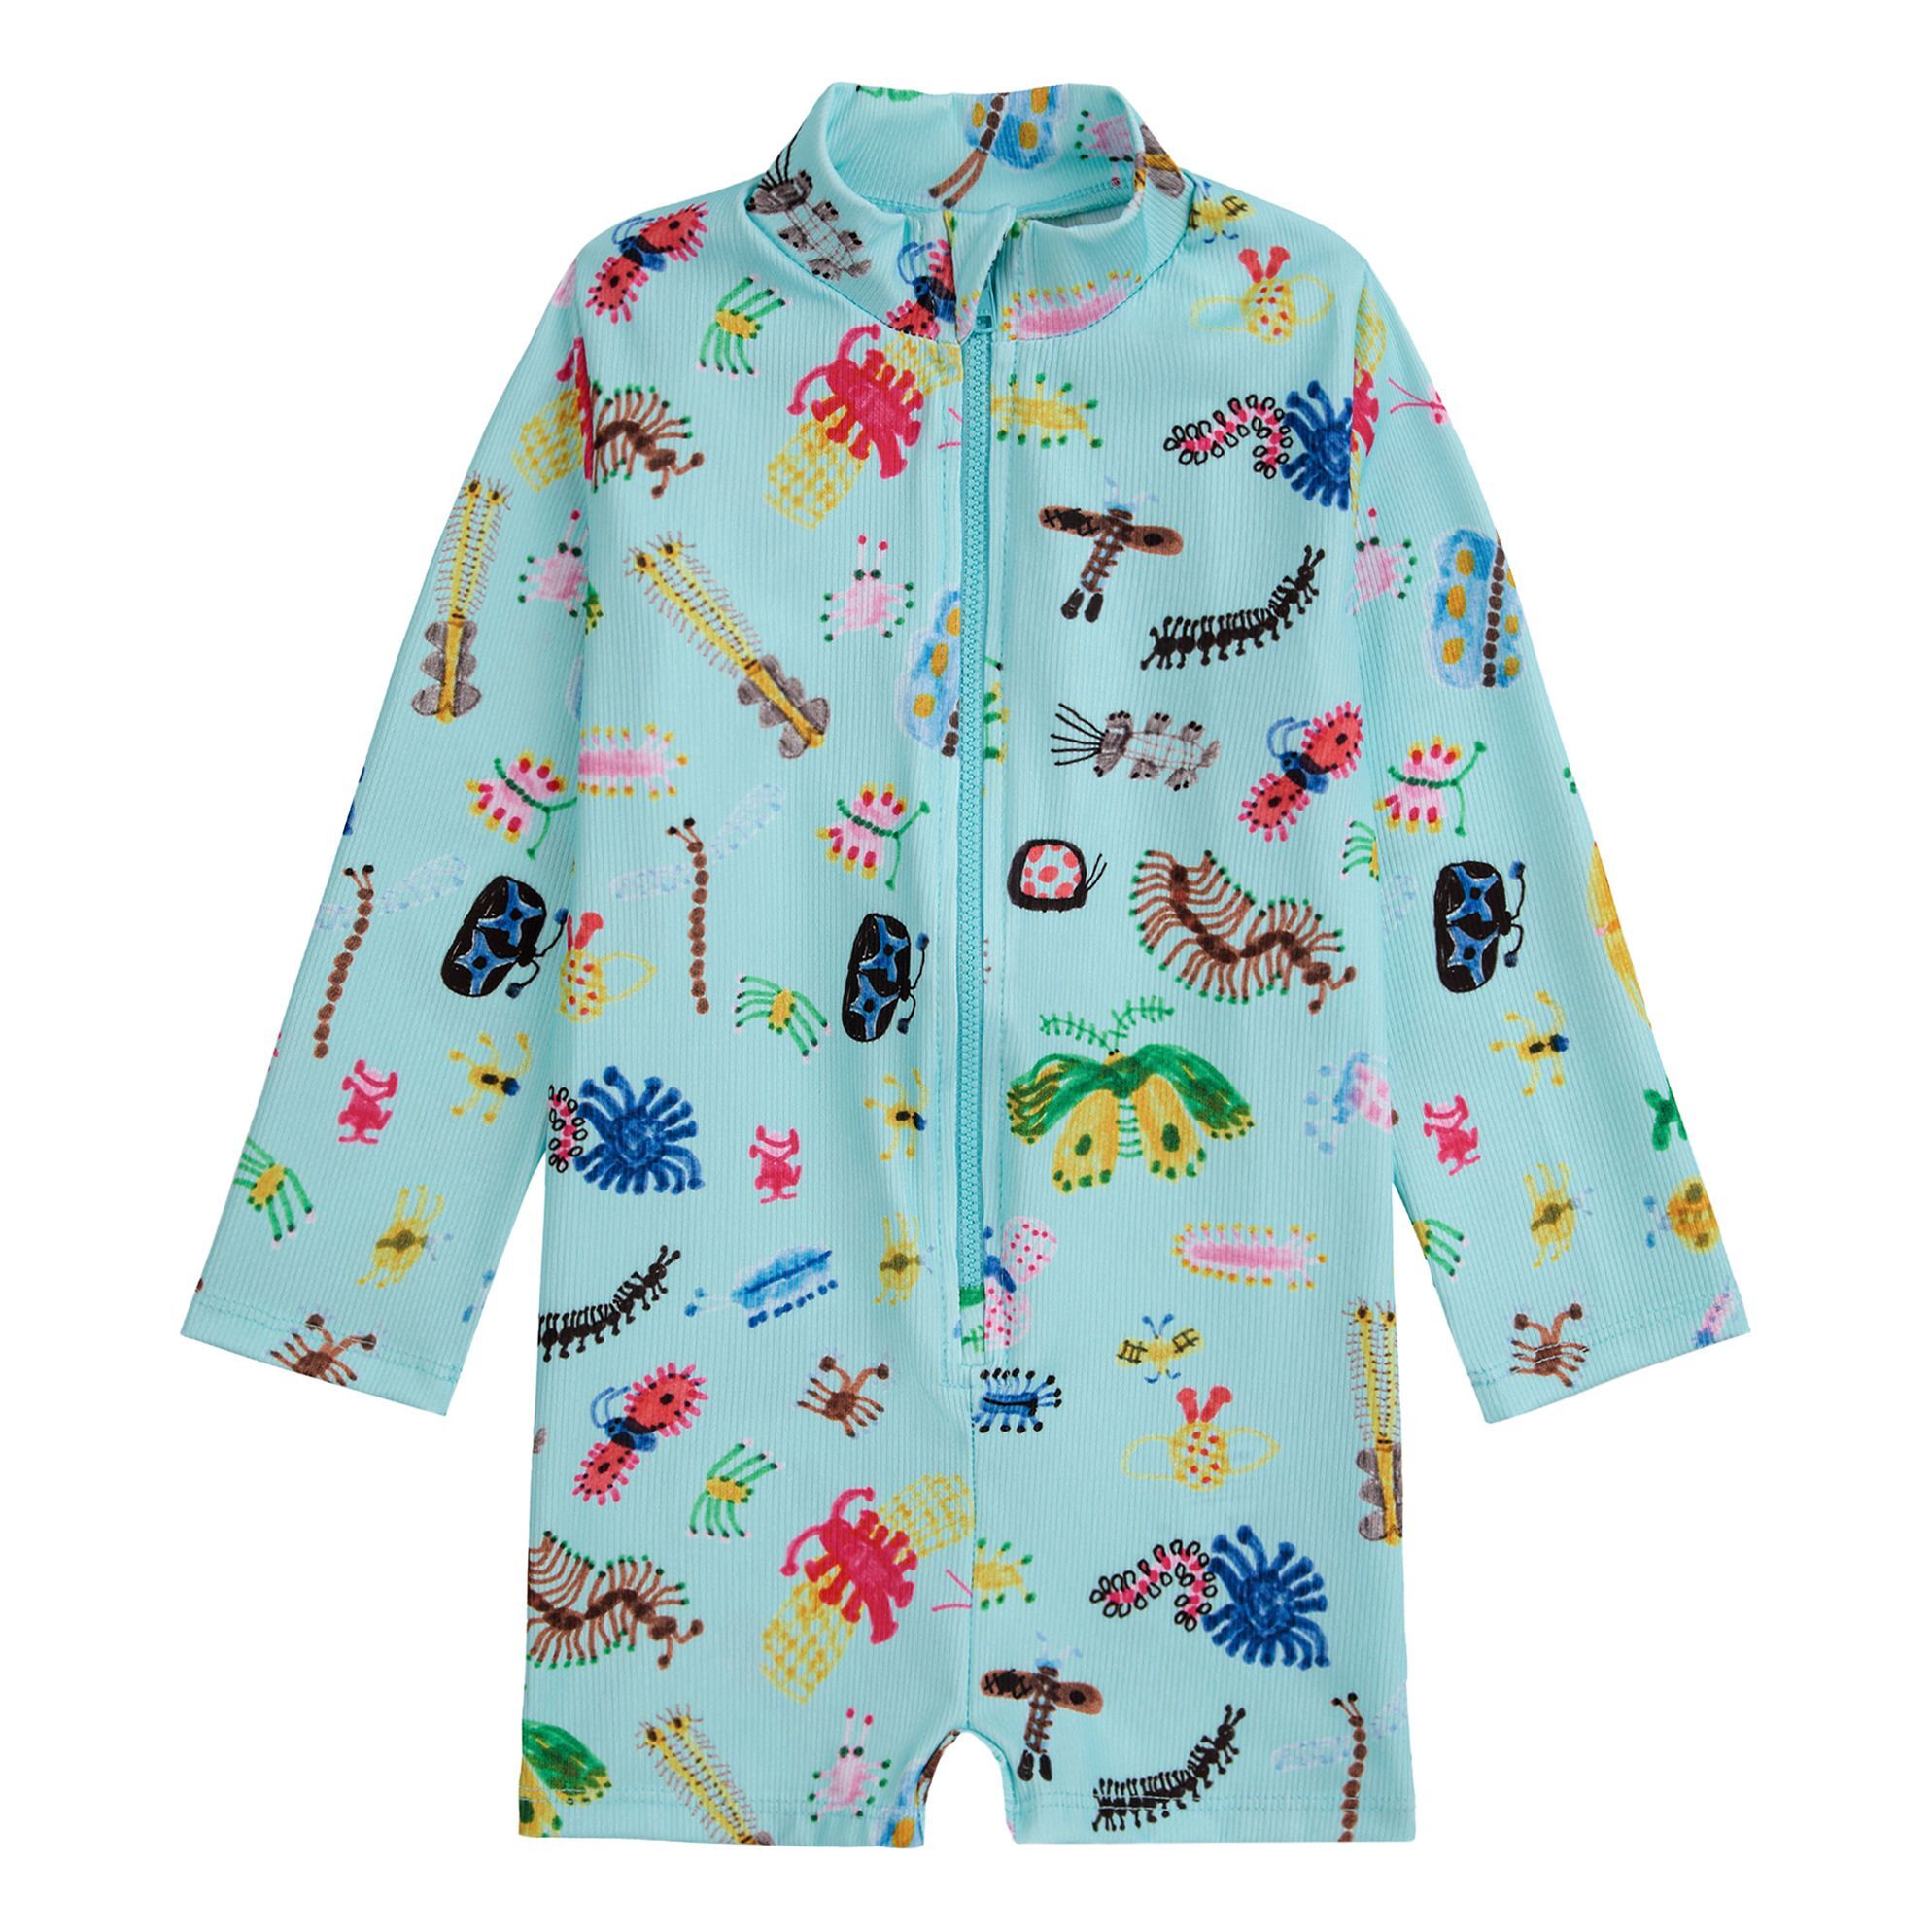 Bobo Choses UV protection suit Recycled material Beasts Blue 6 months Girl